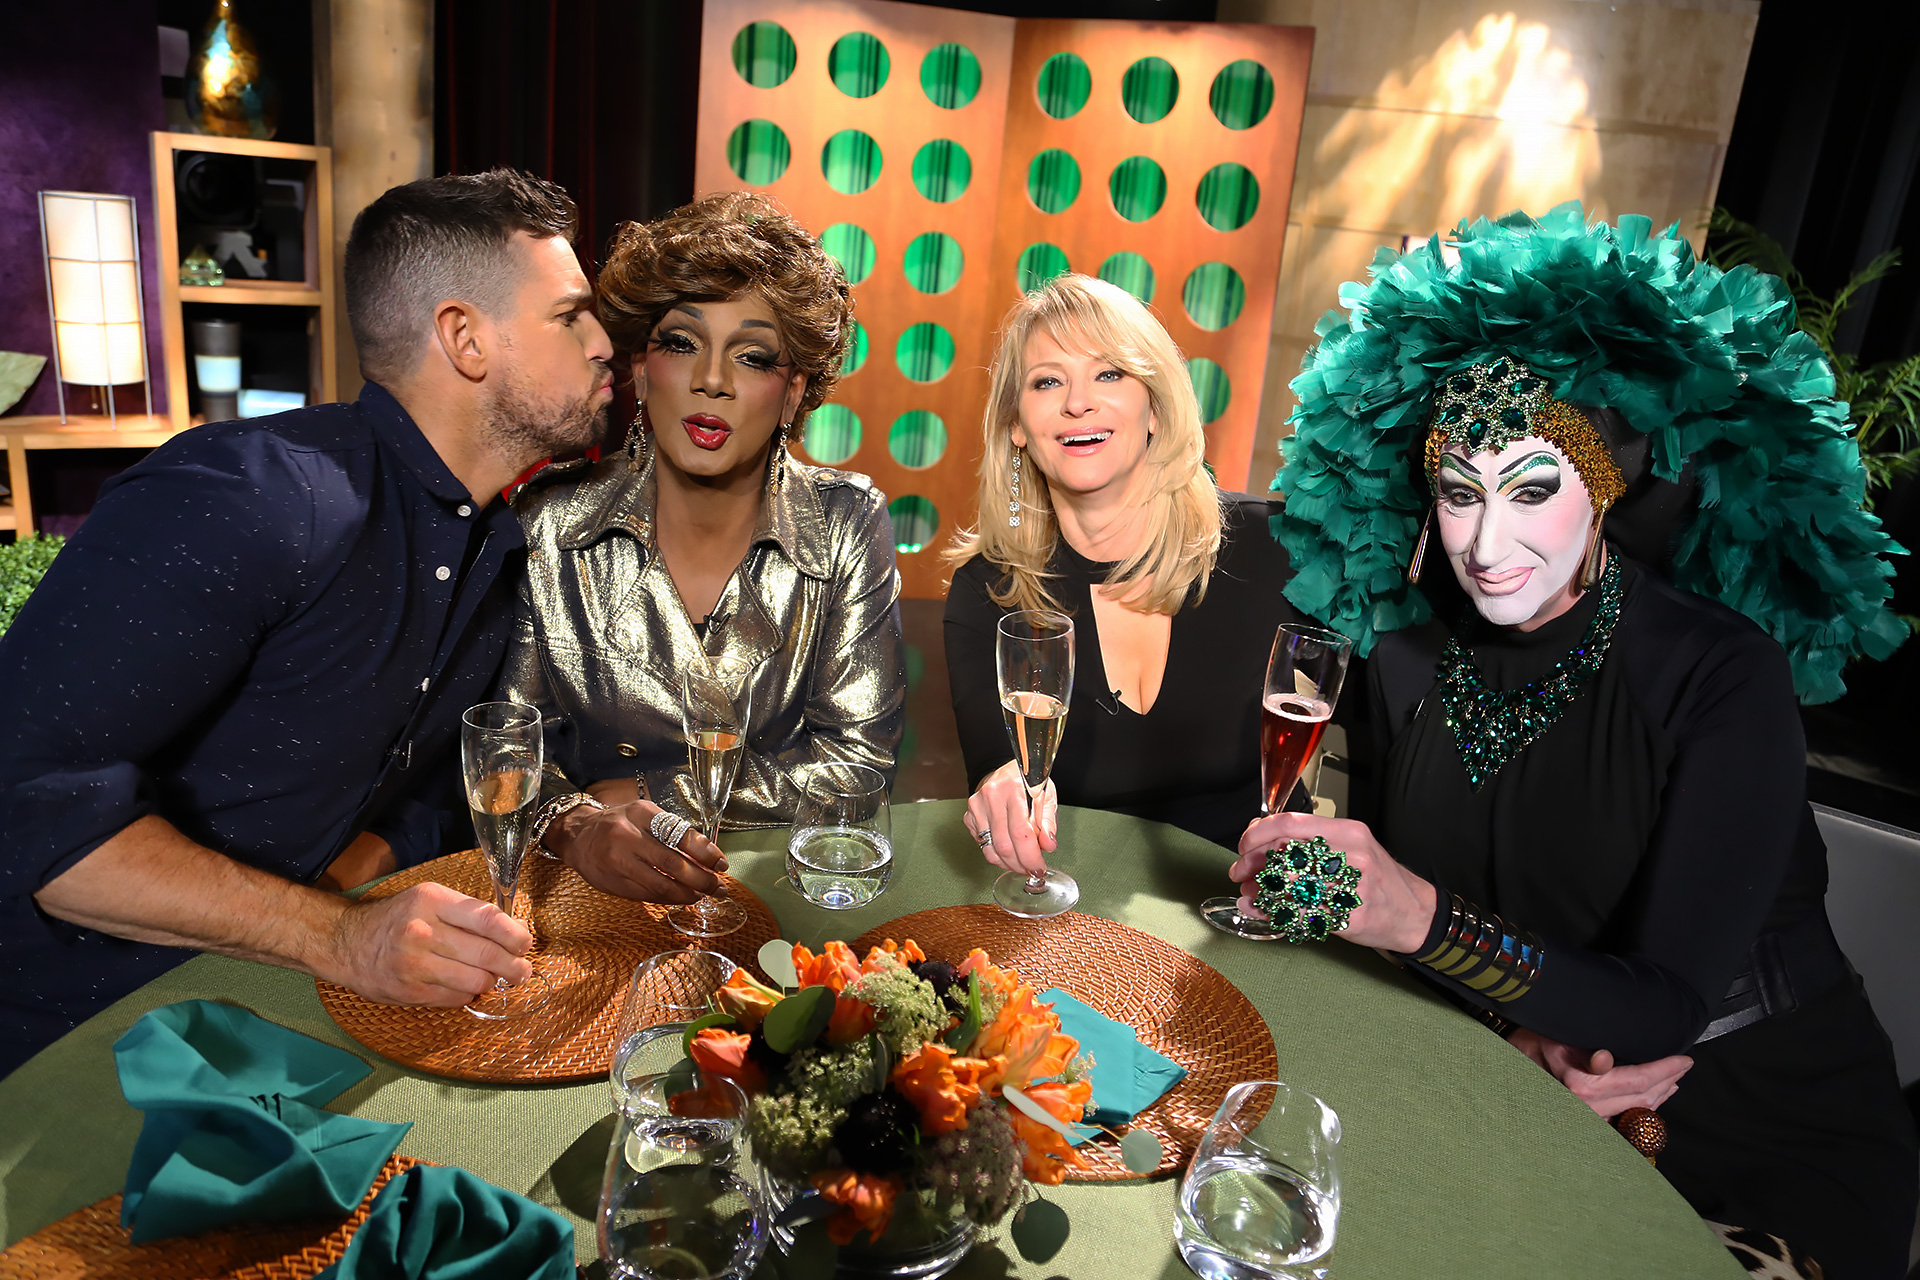 Host Leslie Sbrocco and guests having fun on the set of season 13 episode 2.